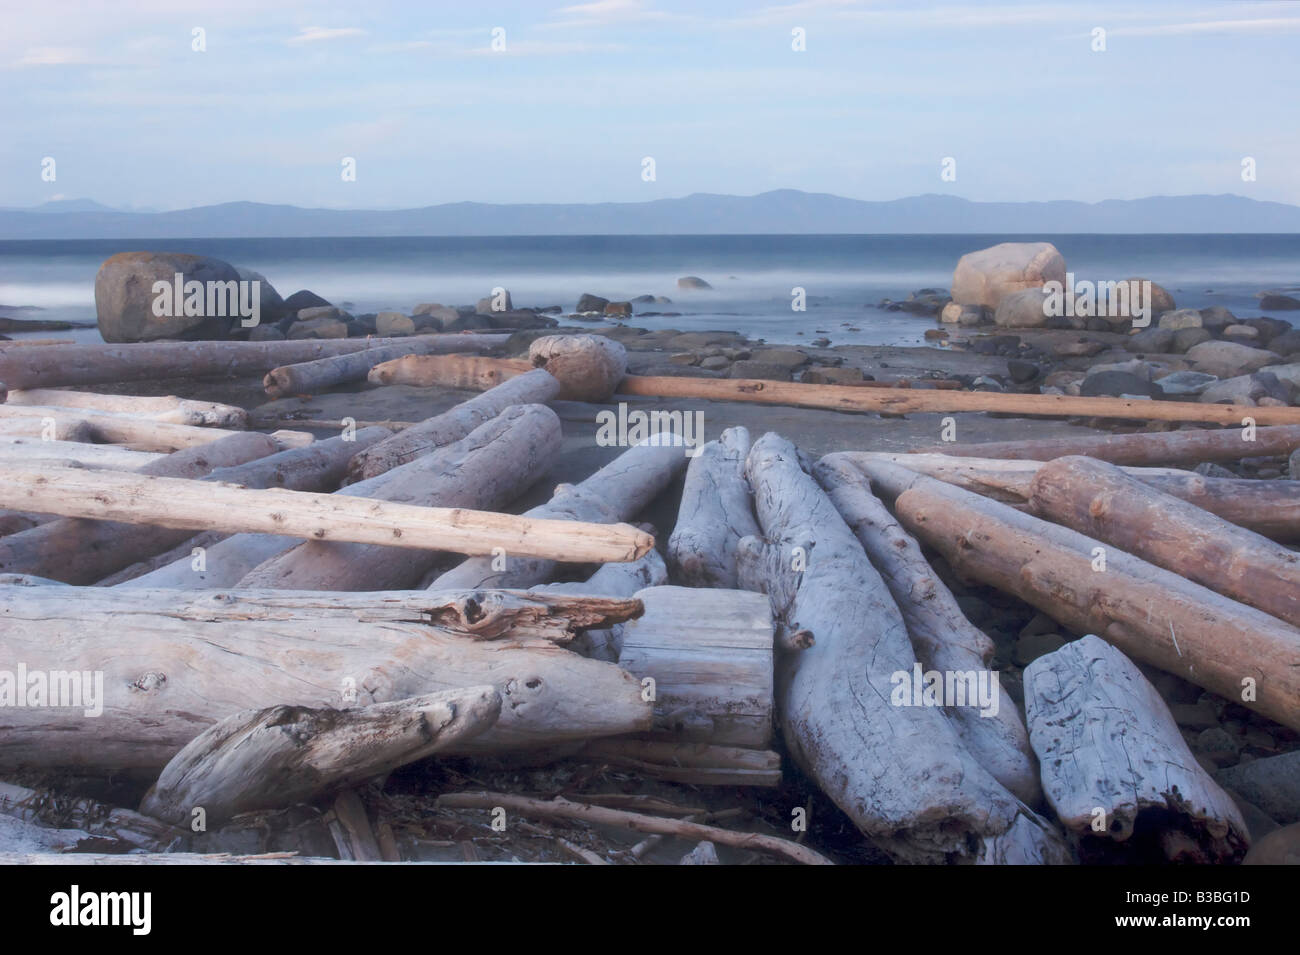 Driftwood logs line a beach at Trailee Point on Hornby Island in British Columbia, Canada. Stock Photo